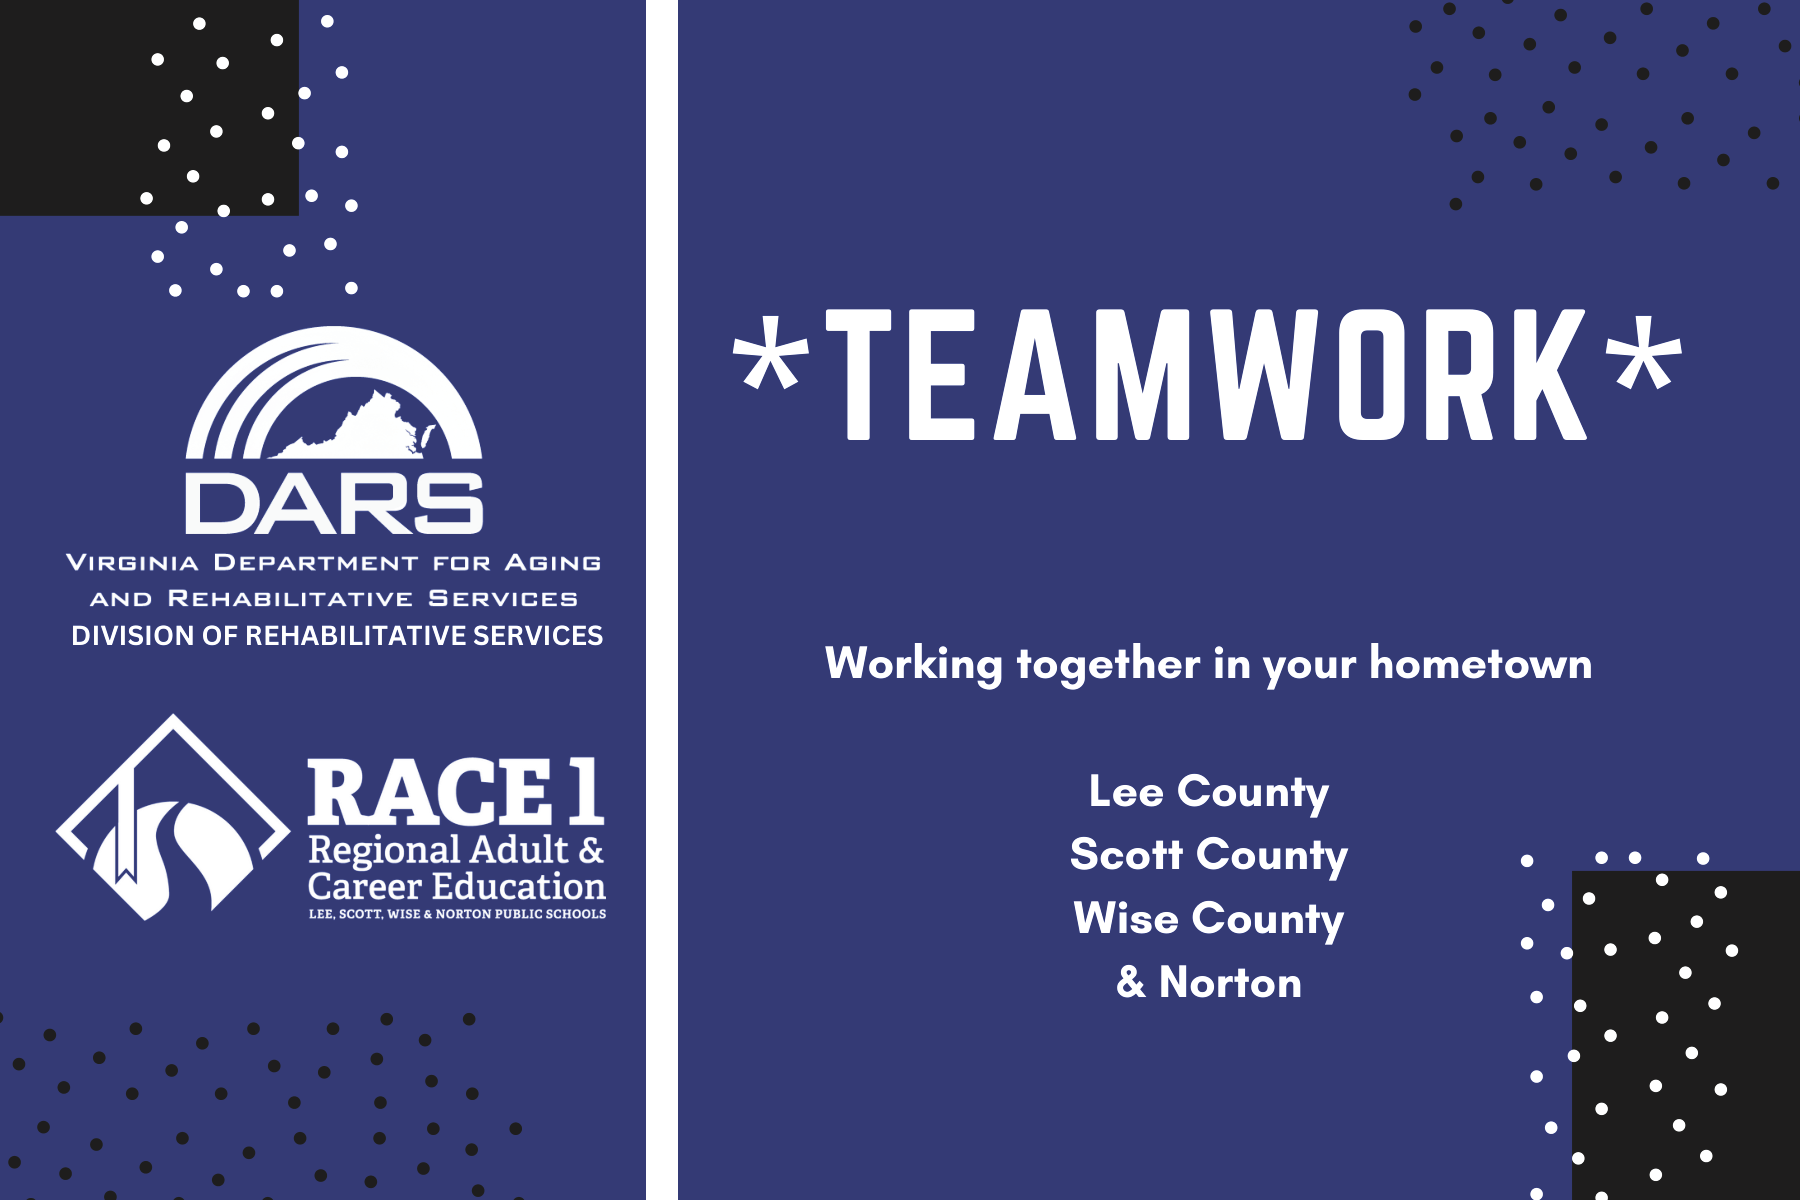 DARS and RACE 1 Teamwork flyer - page 1 - with logos and slogan 'Working together in your hometown, Lee County, Scott County, Wise County, & Norton